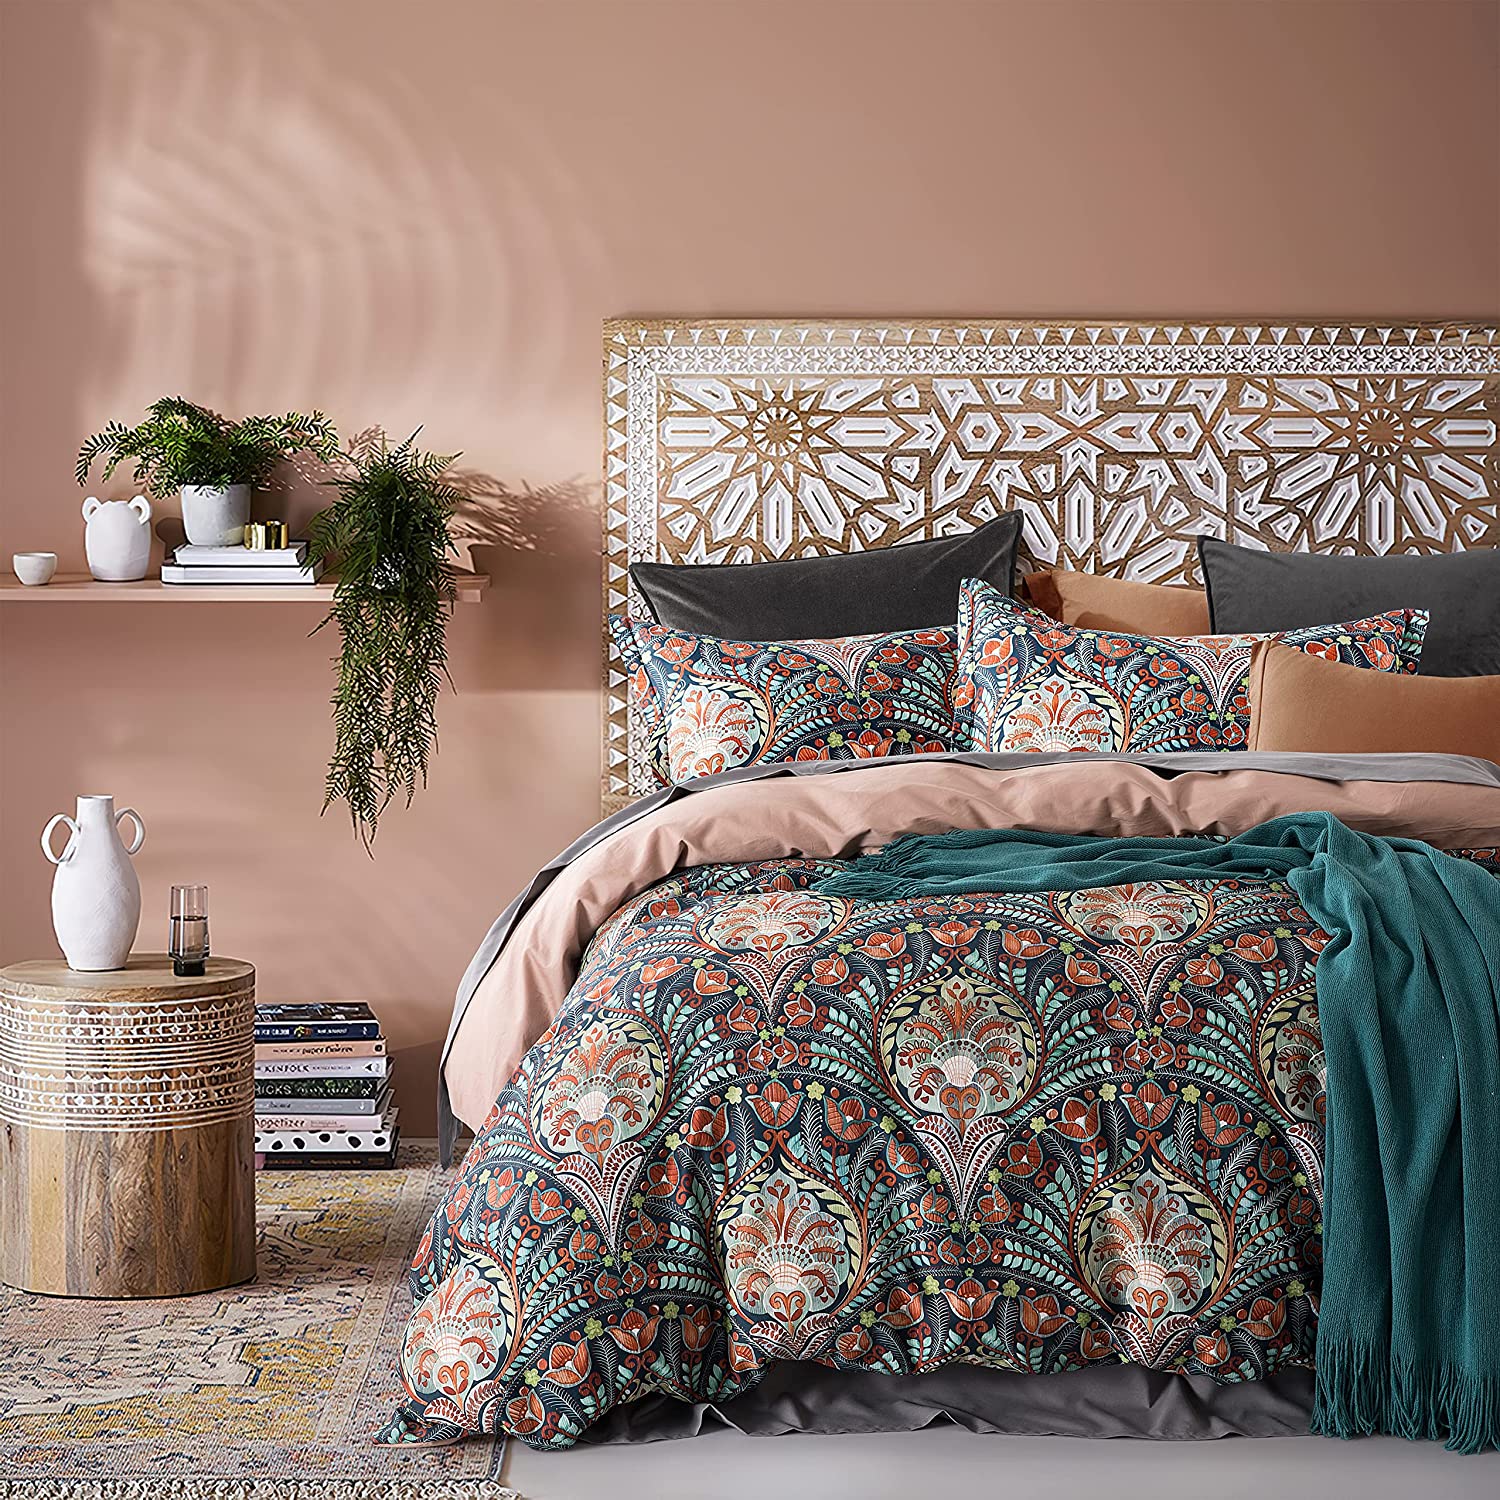 Price:$128.80  Damask Bohemian Paisley Duvet Cover Set Boho Chic Watercolor Medallion 400TC Egyptian Cotton Sateen Luxury Style Bed Linen (Rust Navy, Super King) : Home & Kitchen